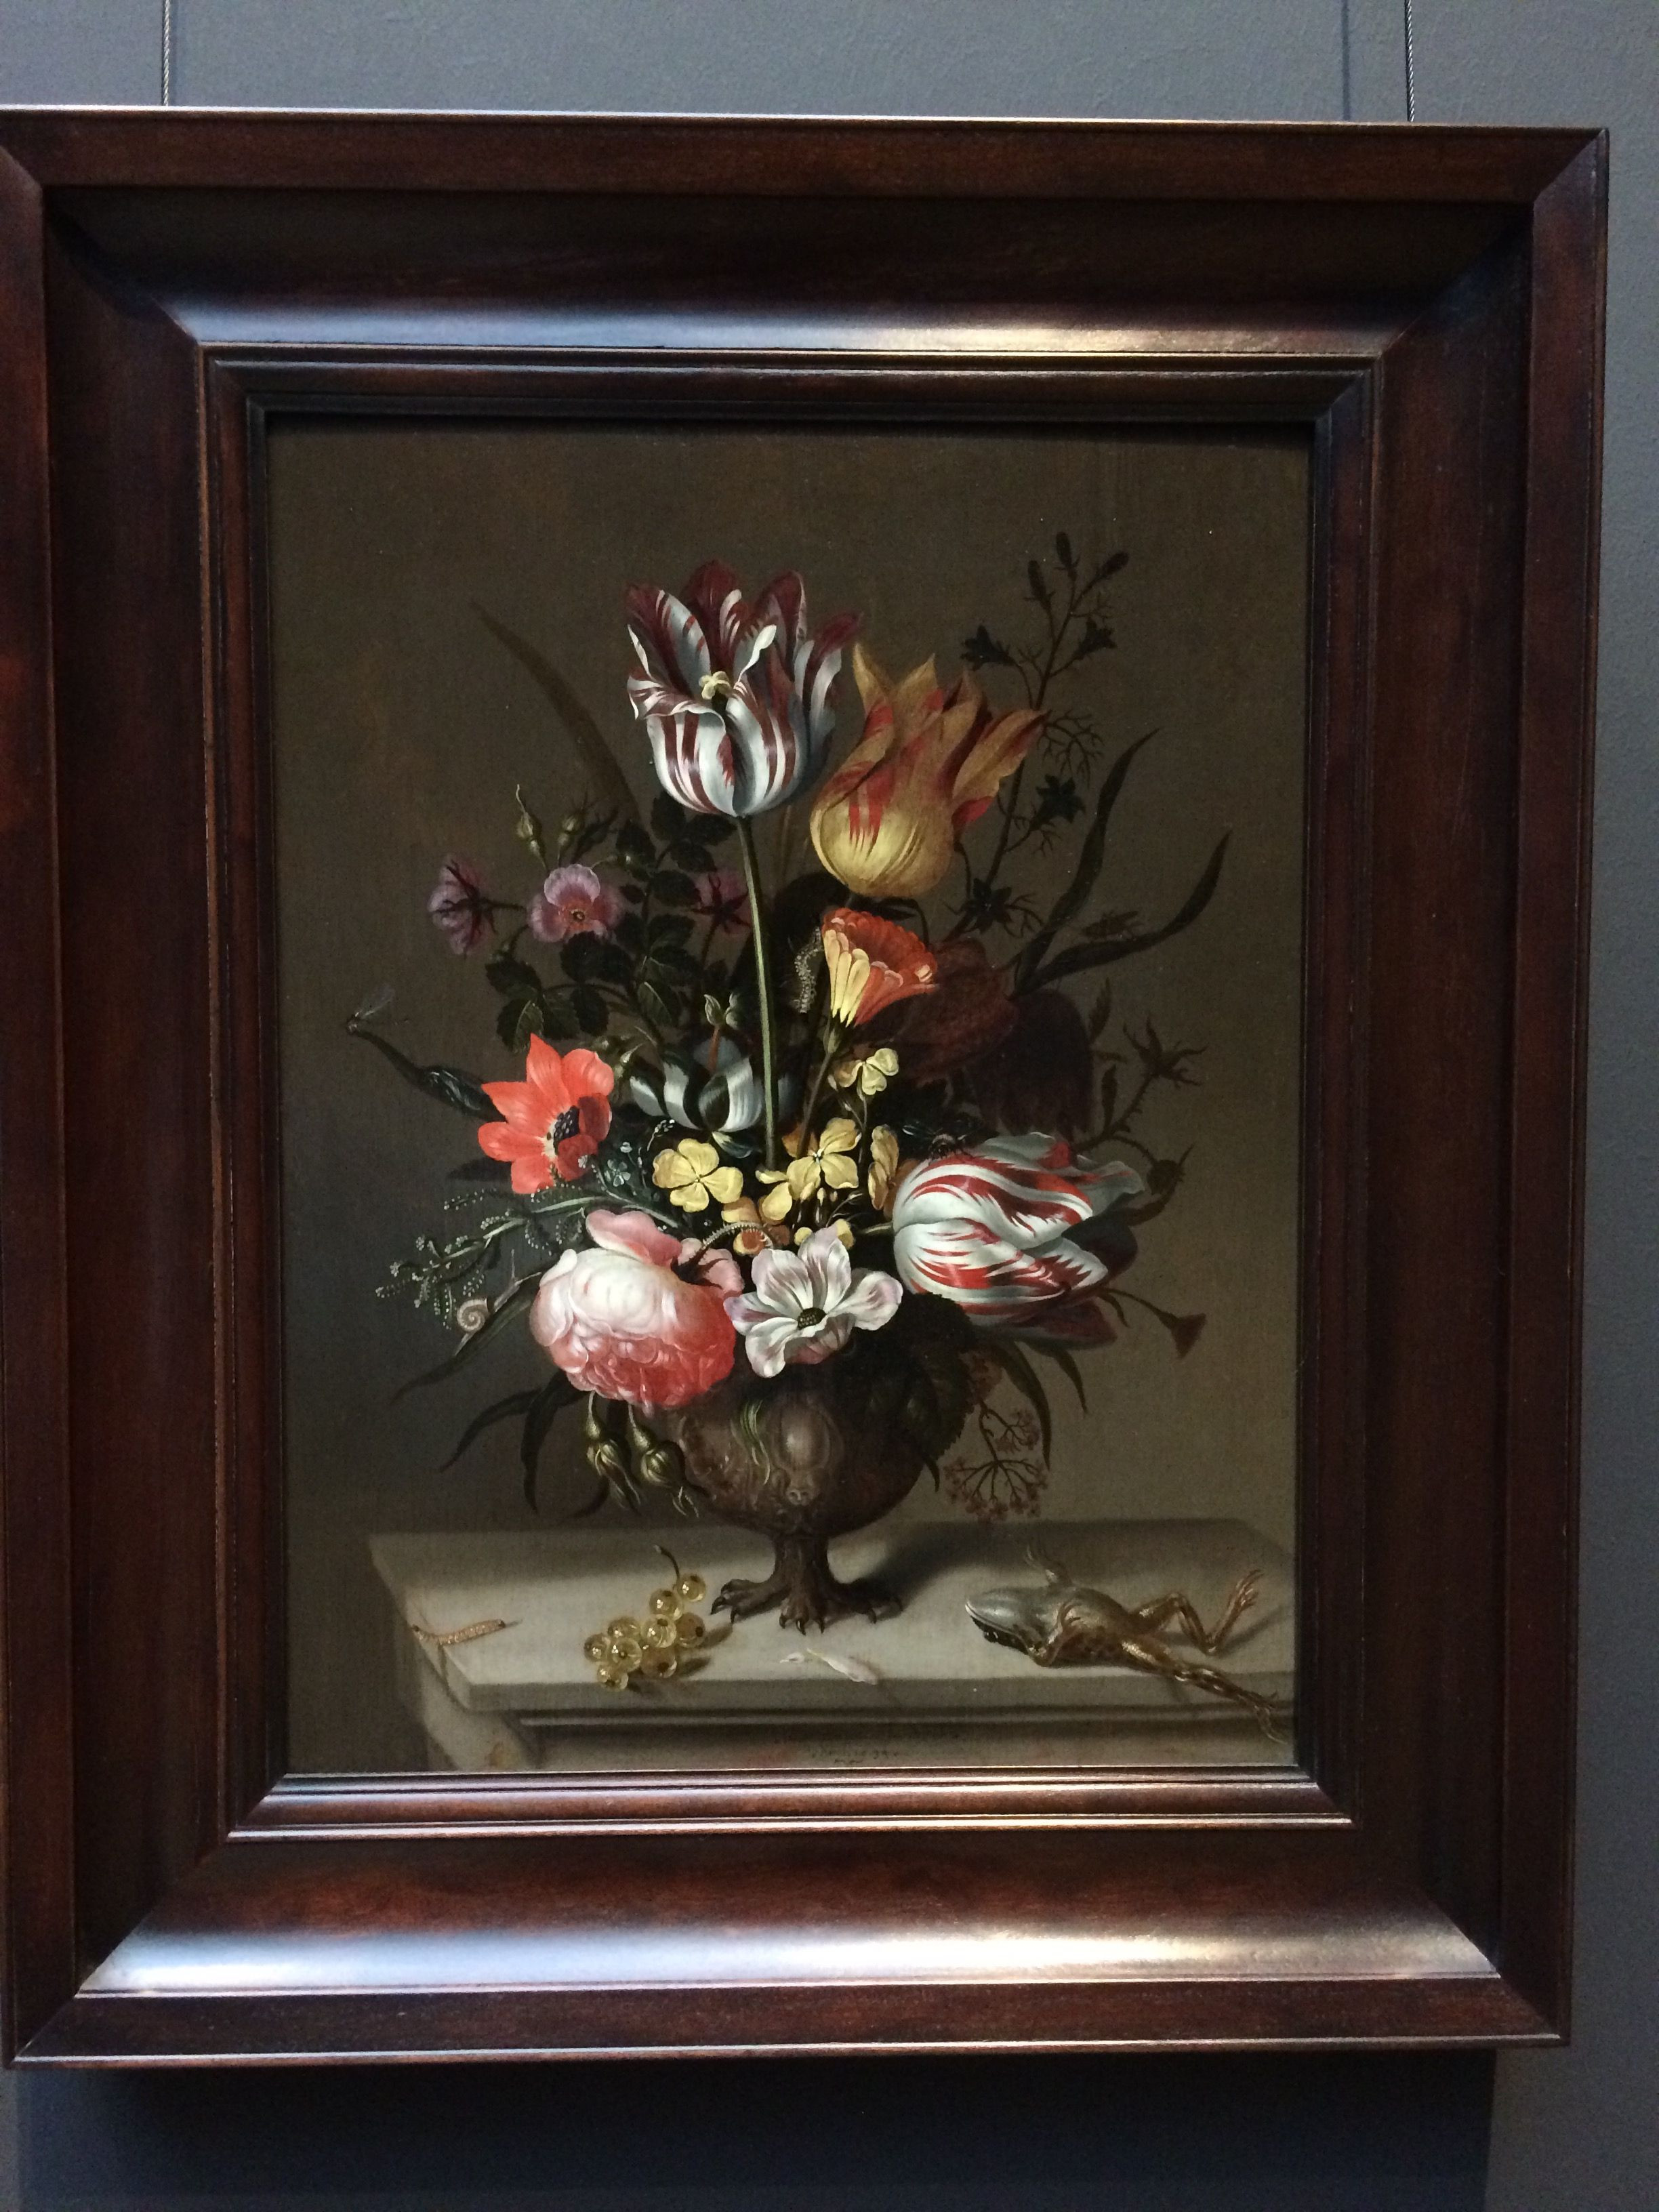 16 attractive Still Life Vase Of Flowers 2024 free download still life vase of flowers of still life with a vase of flowers and a dead frog by jacob marrel with still life with a vase of flowers and a dead frog by jacob marrel the rijksmuseum amsterd